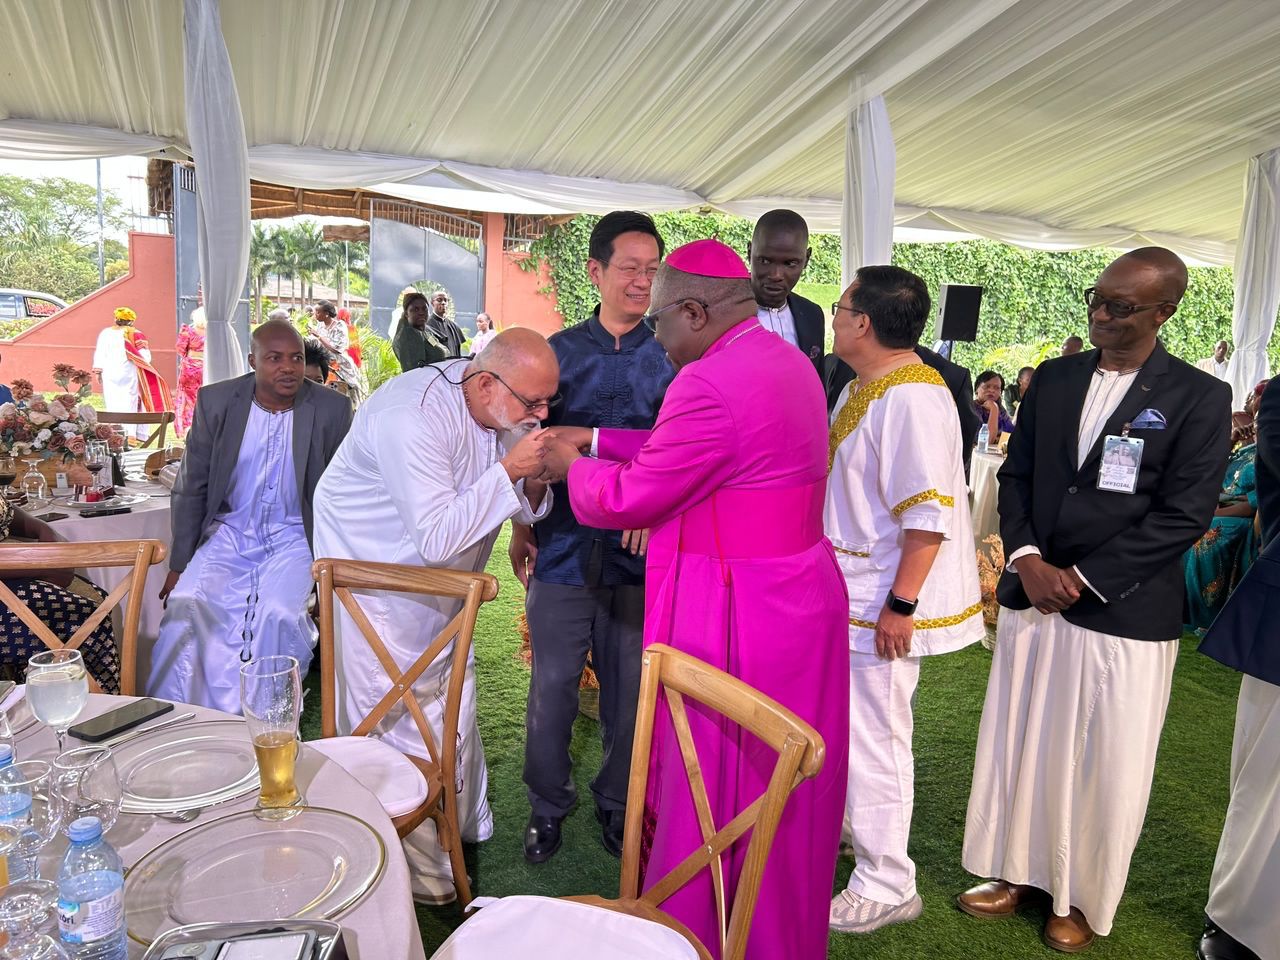 Billionaire Sudhir paying utmost respect to Buganda Values by wearing a Kanzu during a cultural Introduction event.